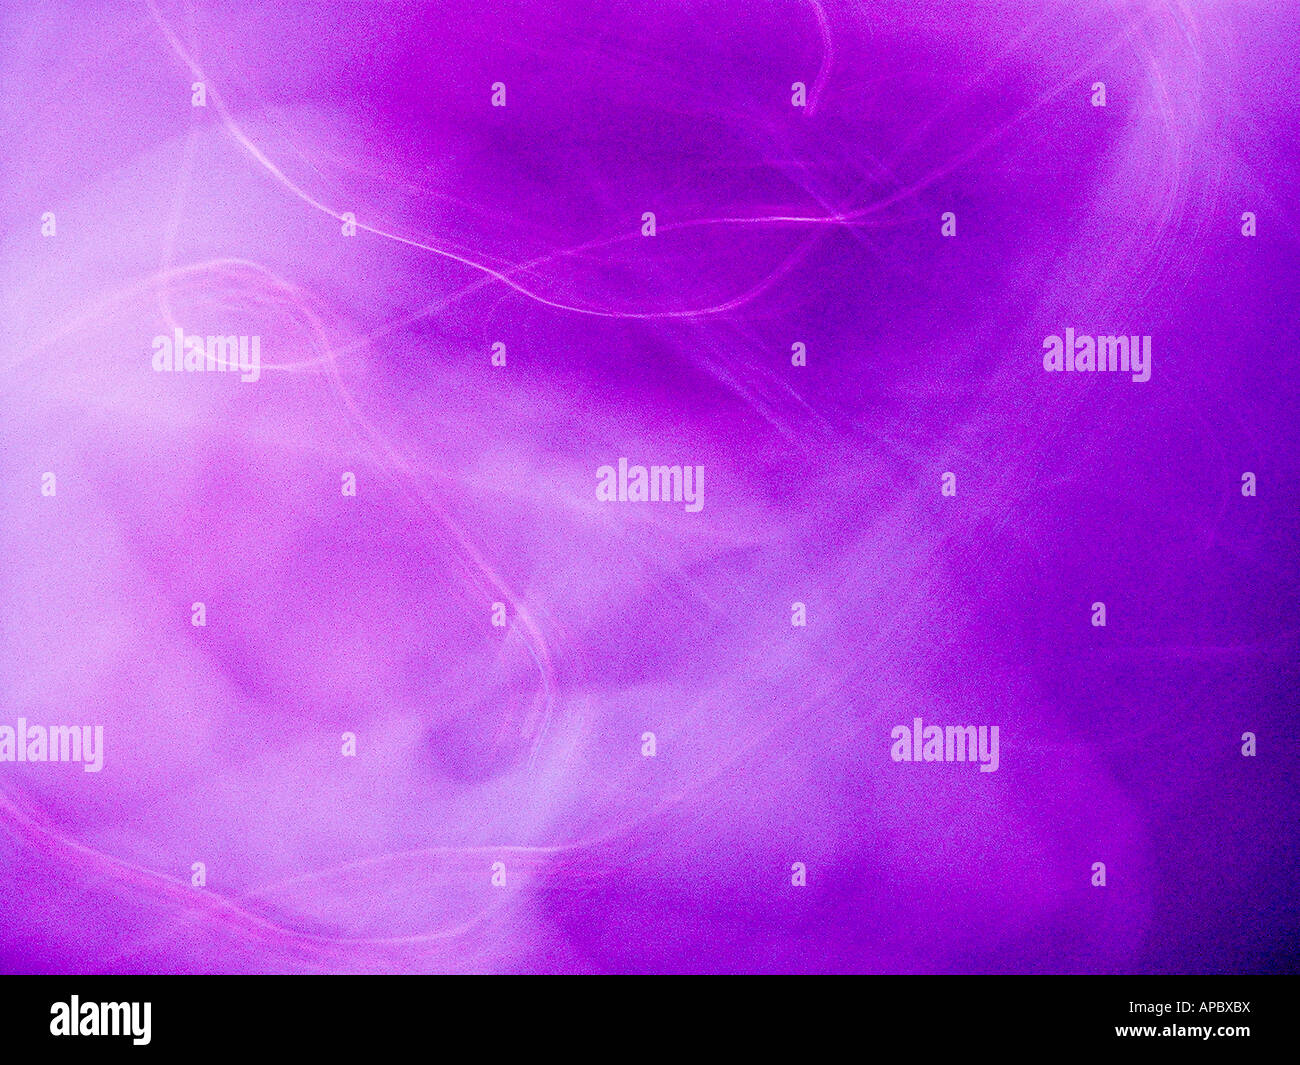 Abstract movement blur, colored purple. Stock Photo